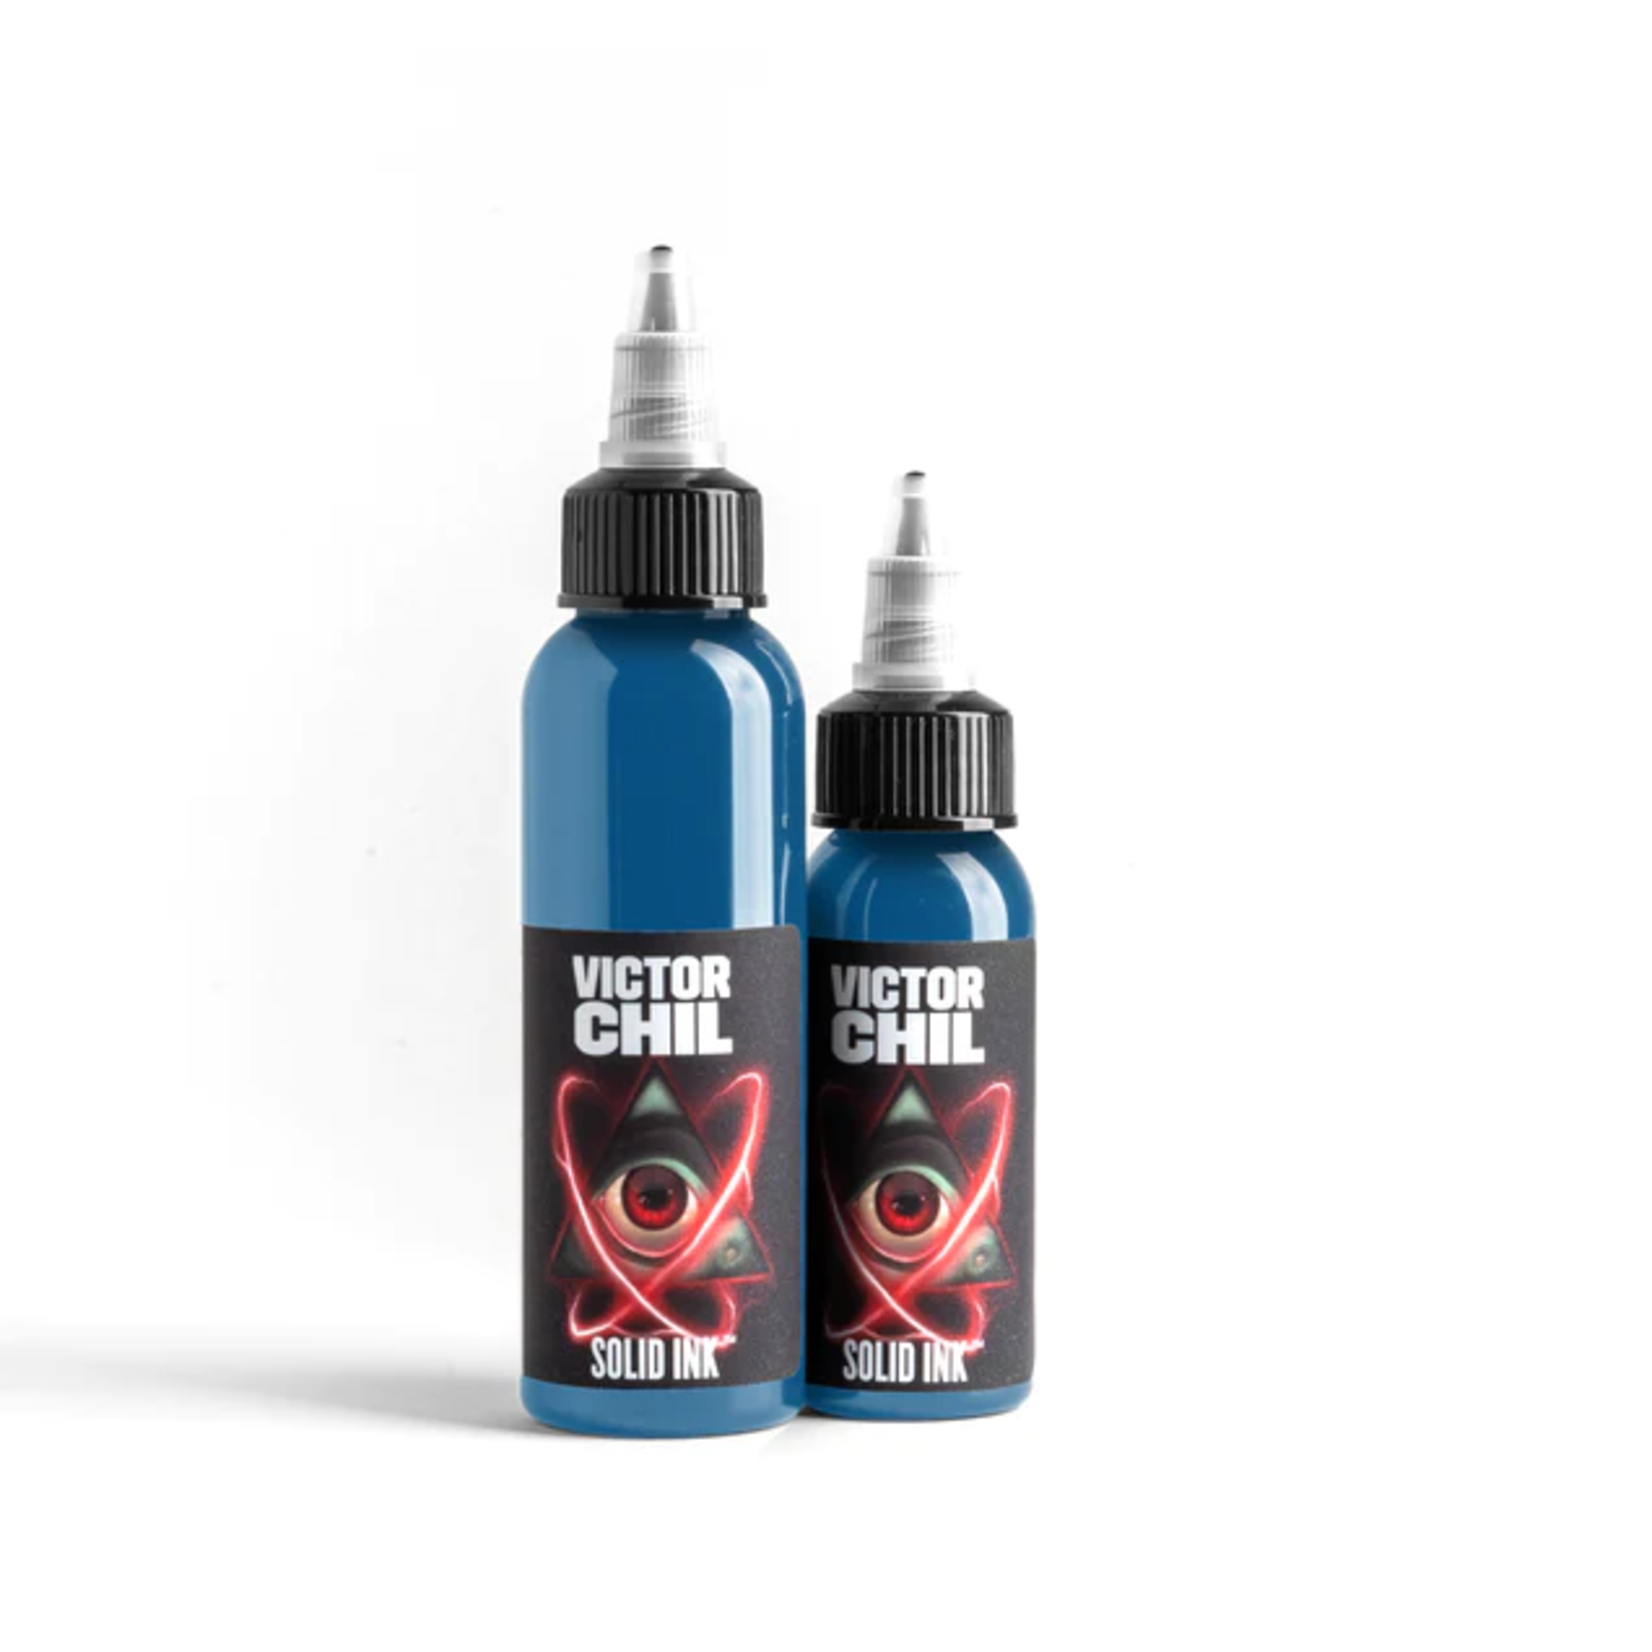 SOLID INK VICTOR CHIL | CHIL BLUE 1OZ